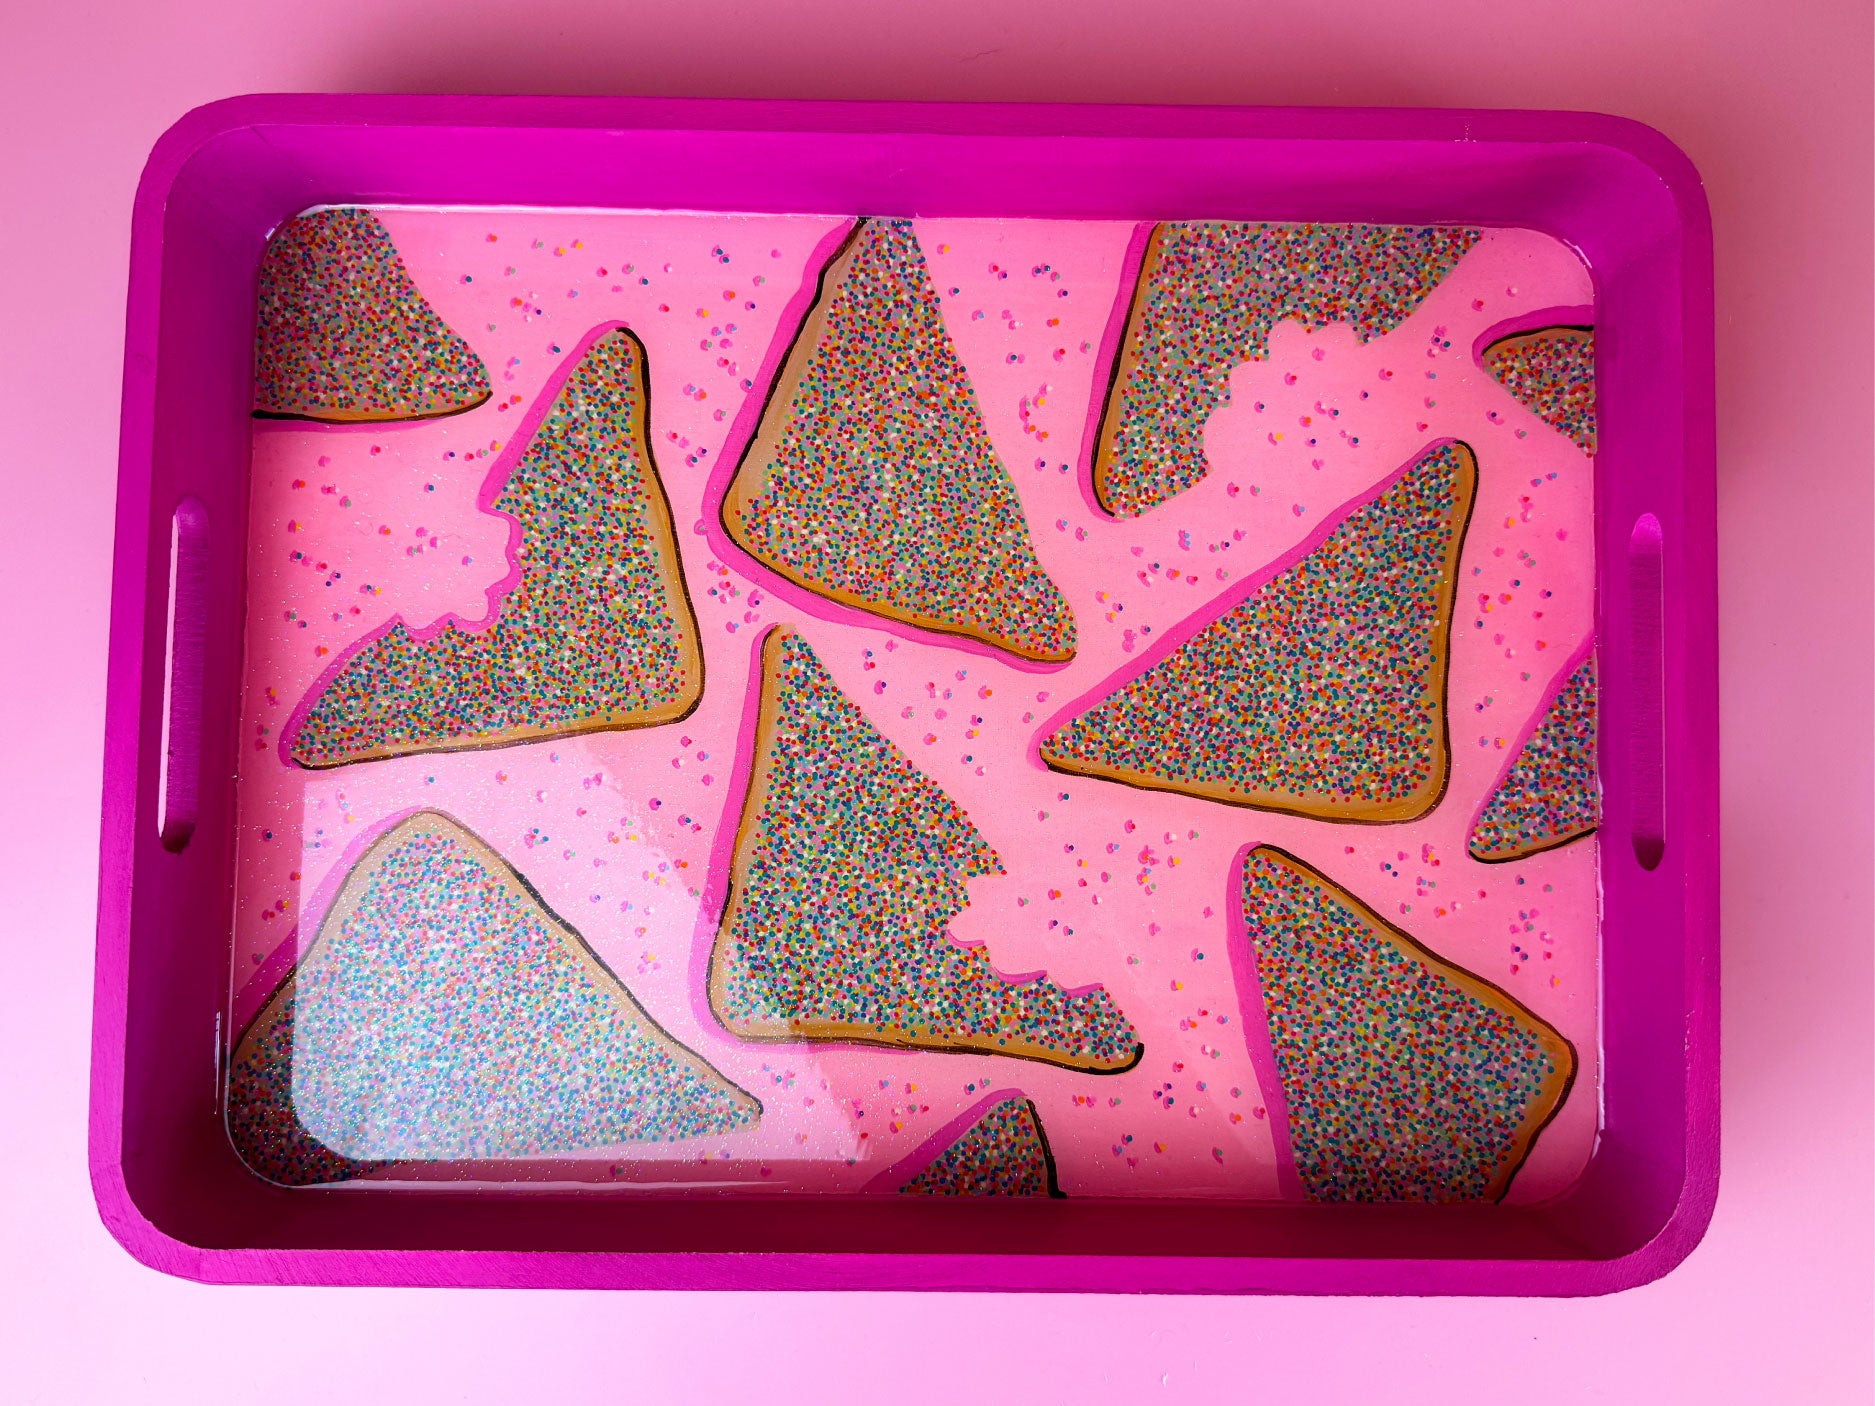 Hand-painted Resin Tray: Fairybread (Pink Glitter)